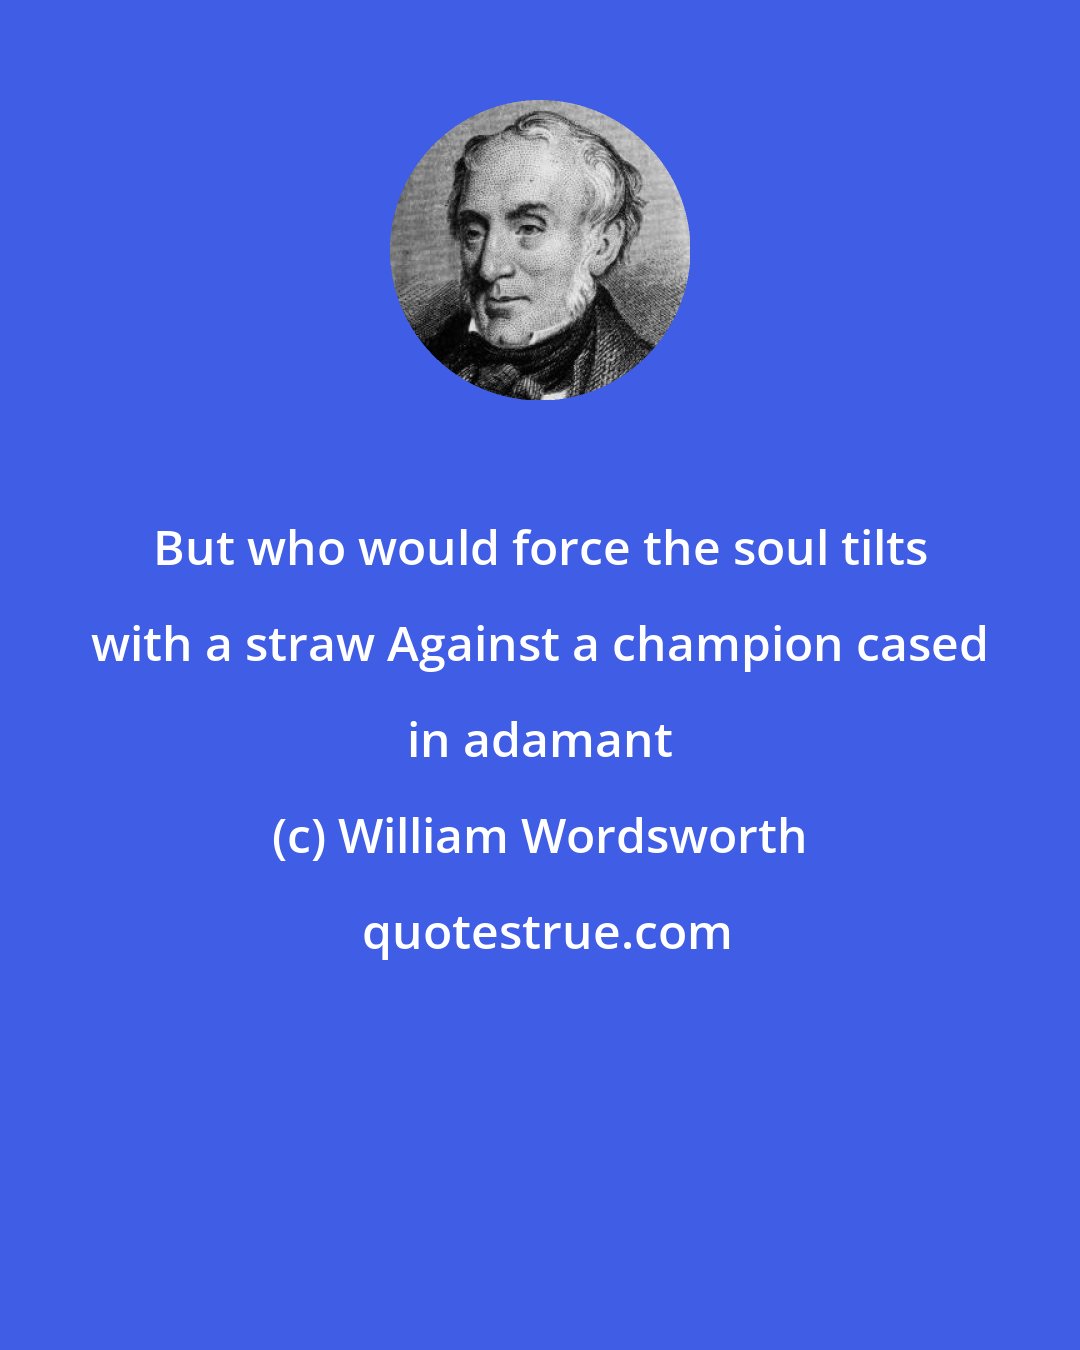 William Wordsworth: But who would force the soul tilts with a straw Against a champion cased in adamant